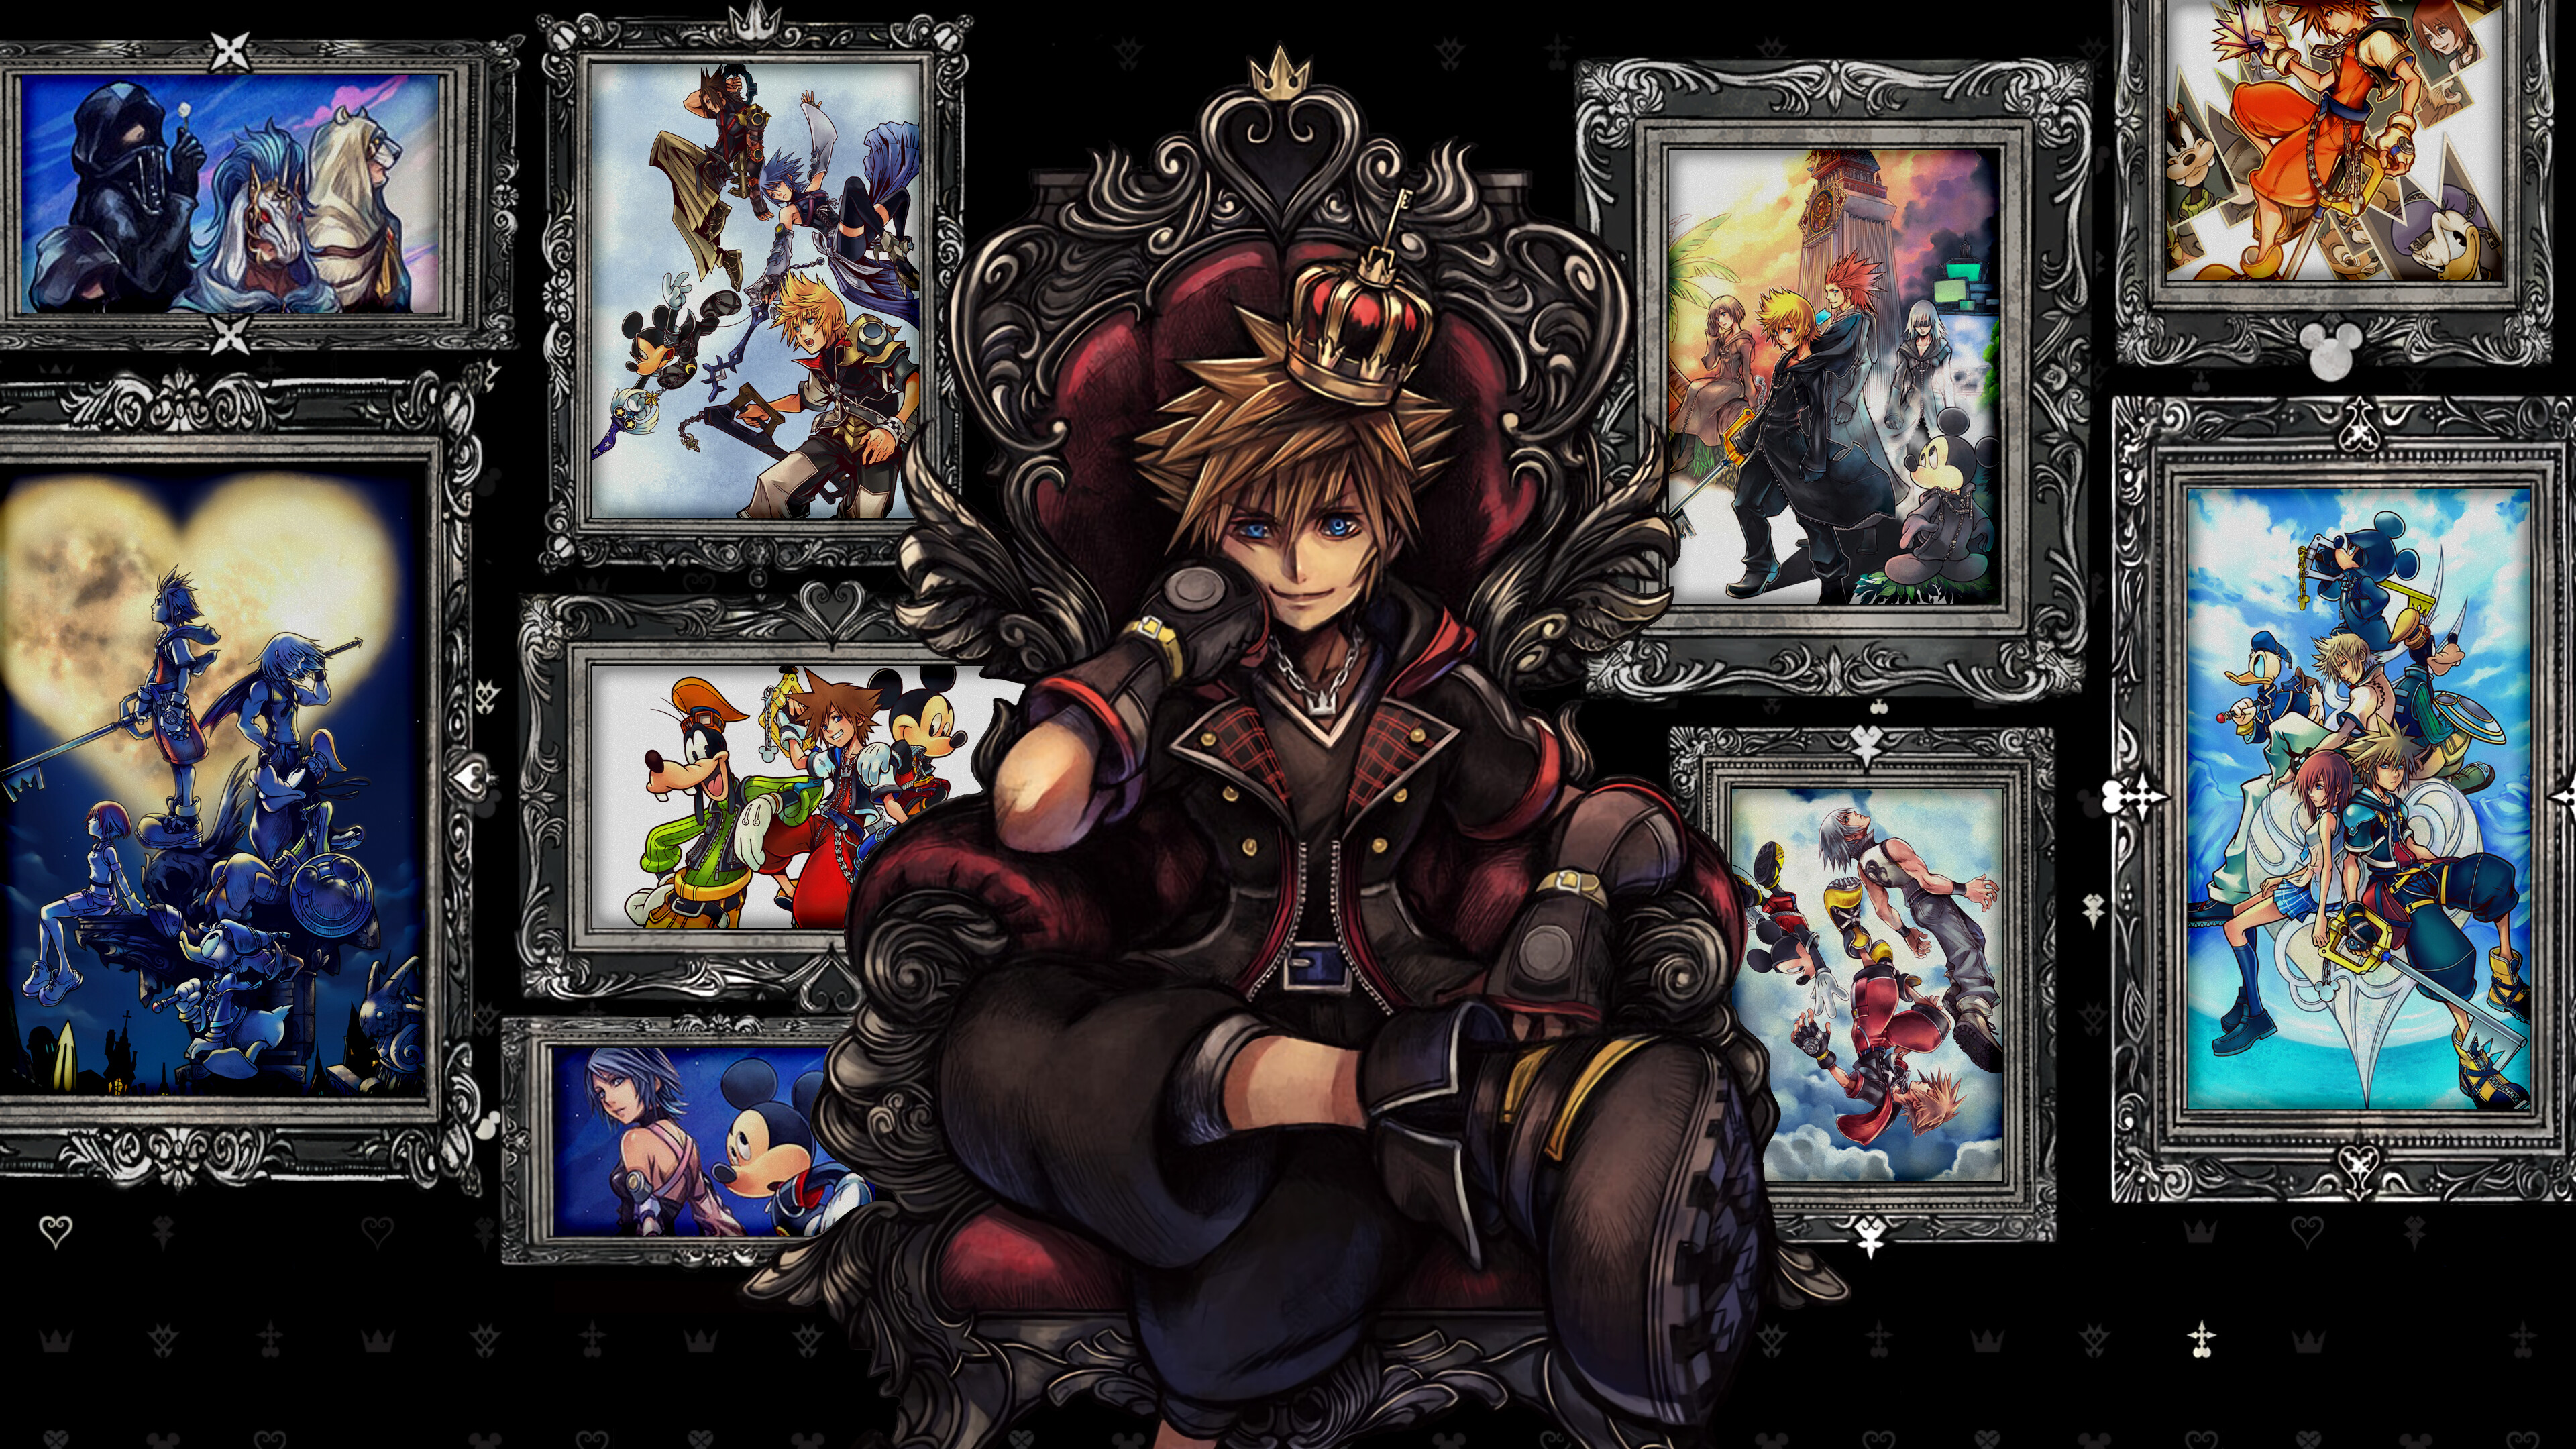 Kingdom Hearts all-in-one box art, Ultimate collector's item, High-resolution masterpiece, Must-have for fans, 3840x2160 4K Desktop